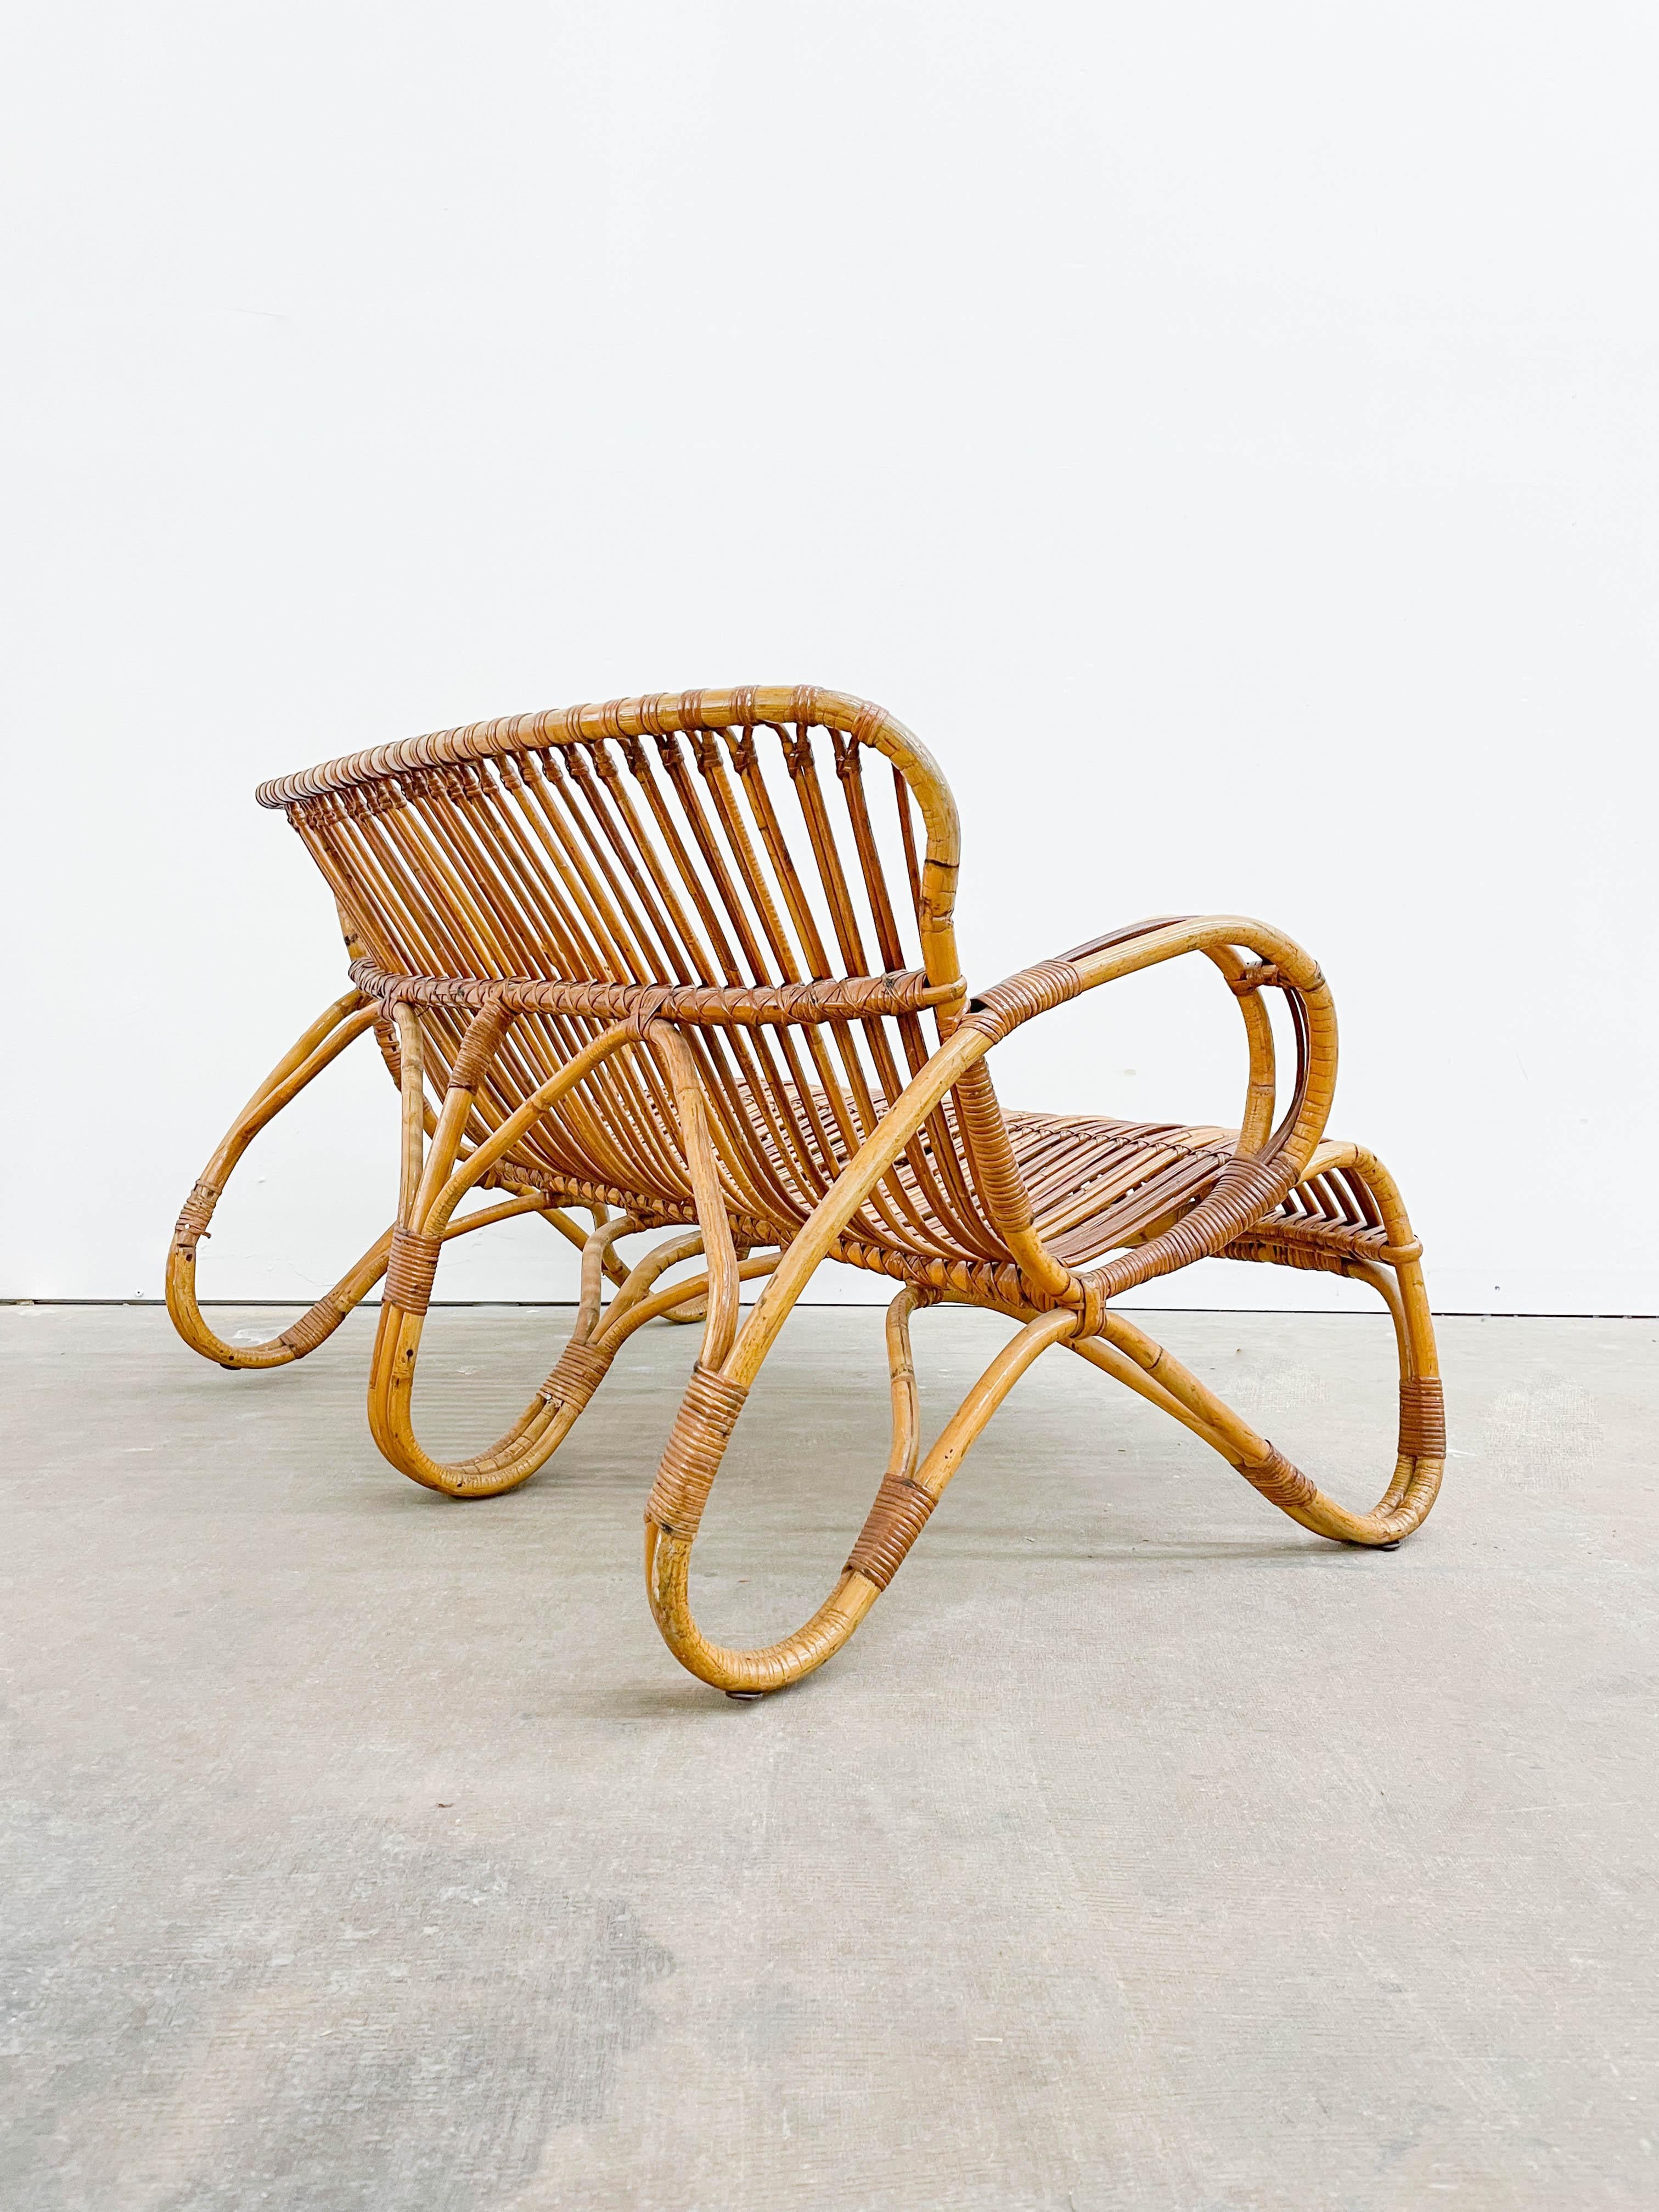 20th Century Vintage Sculptural Bamboo Sofa by Rohe Noorwolde, 1960s For Sale